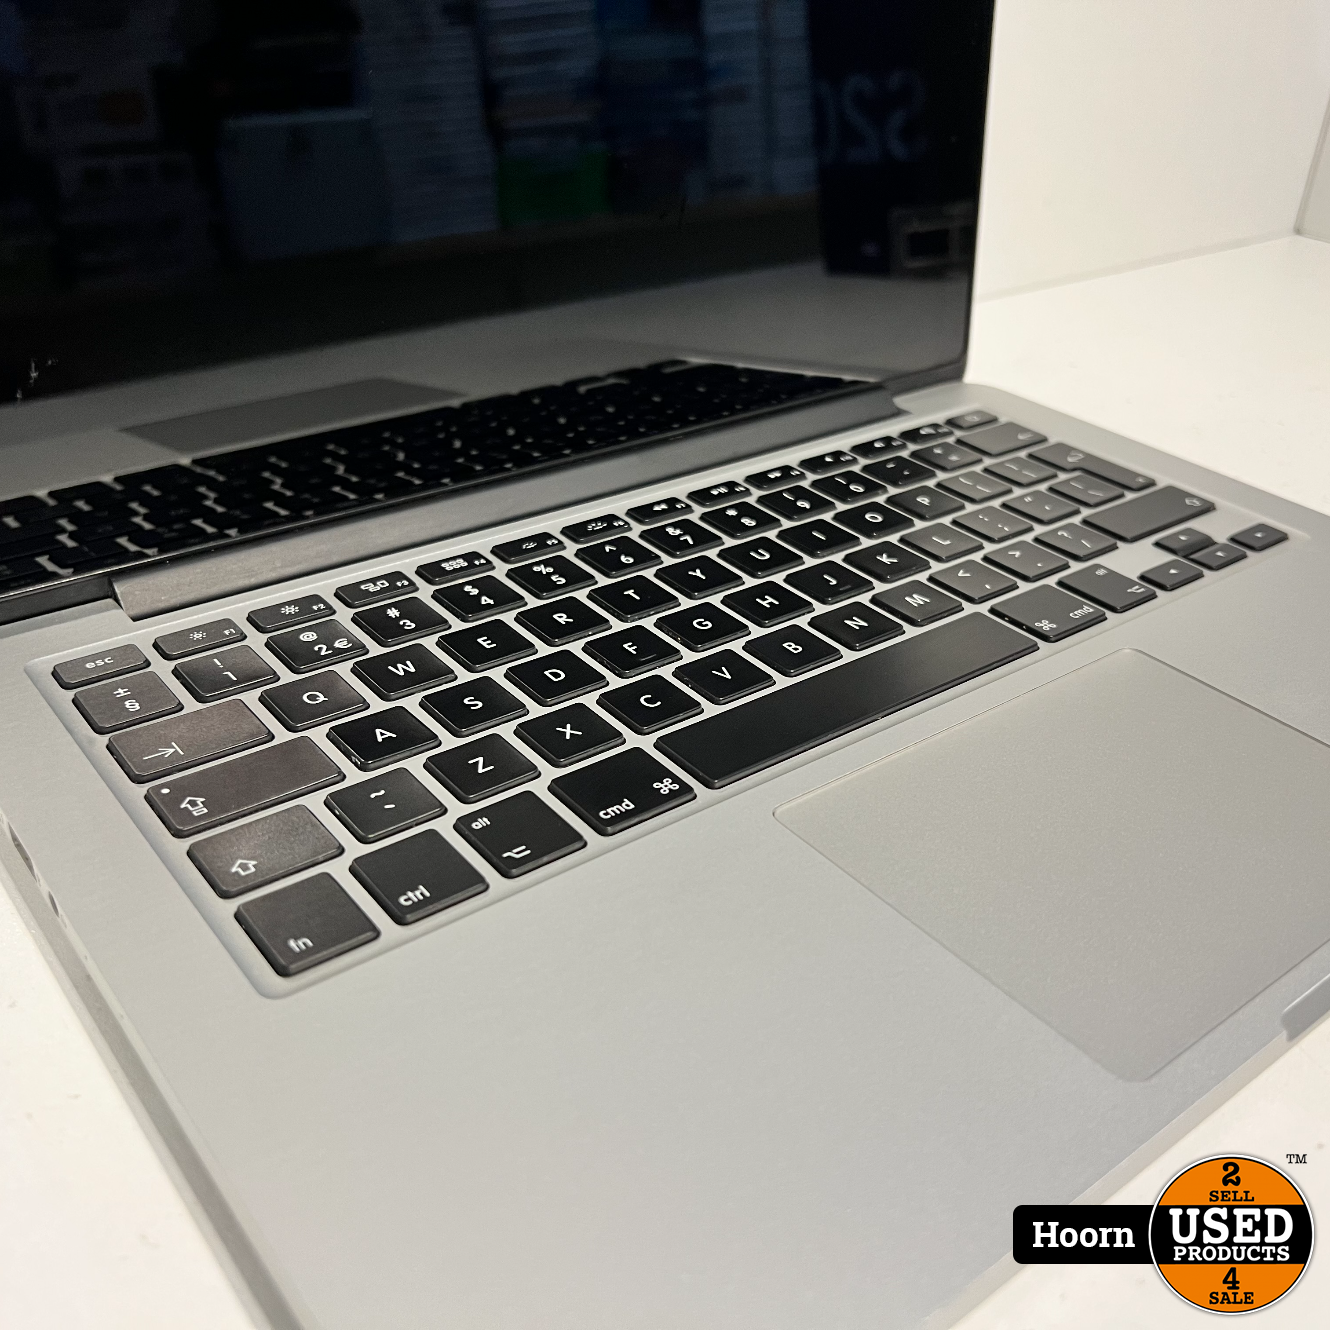 Apple Macbook Pro Retina 2014 incl. Lader i5/8GB/128GB - Used Products